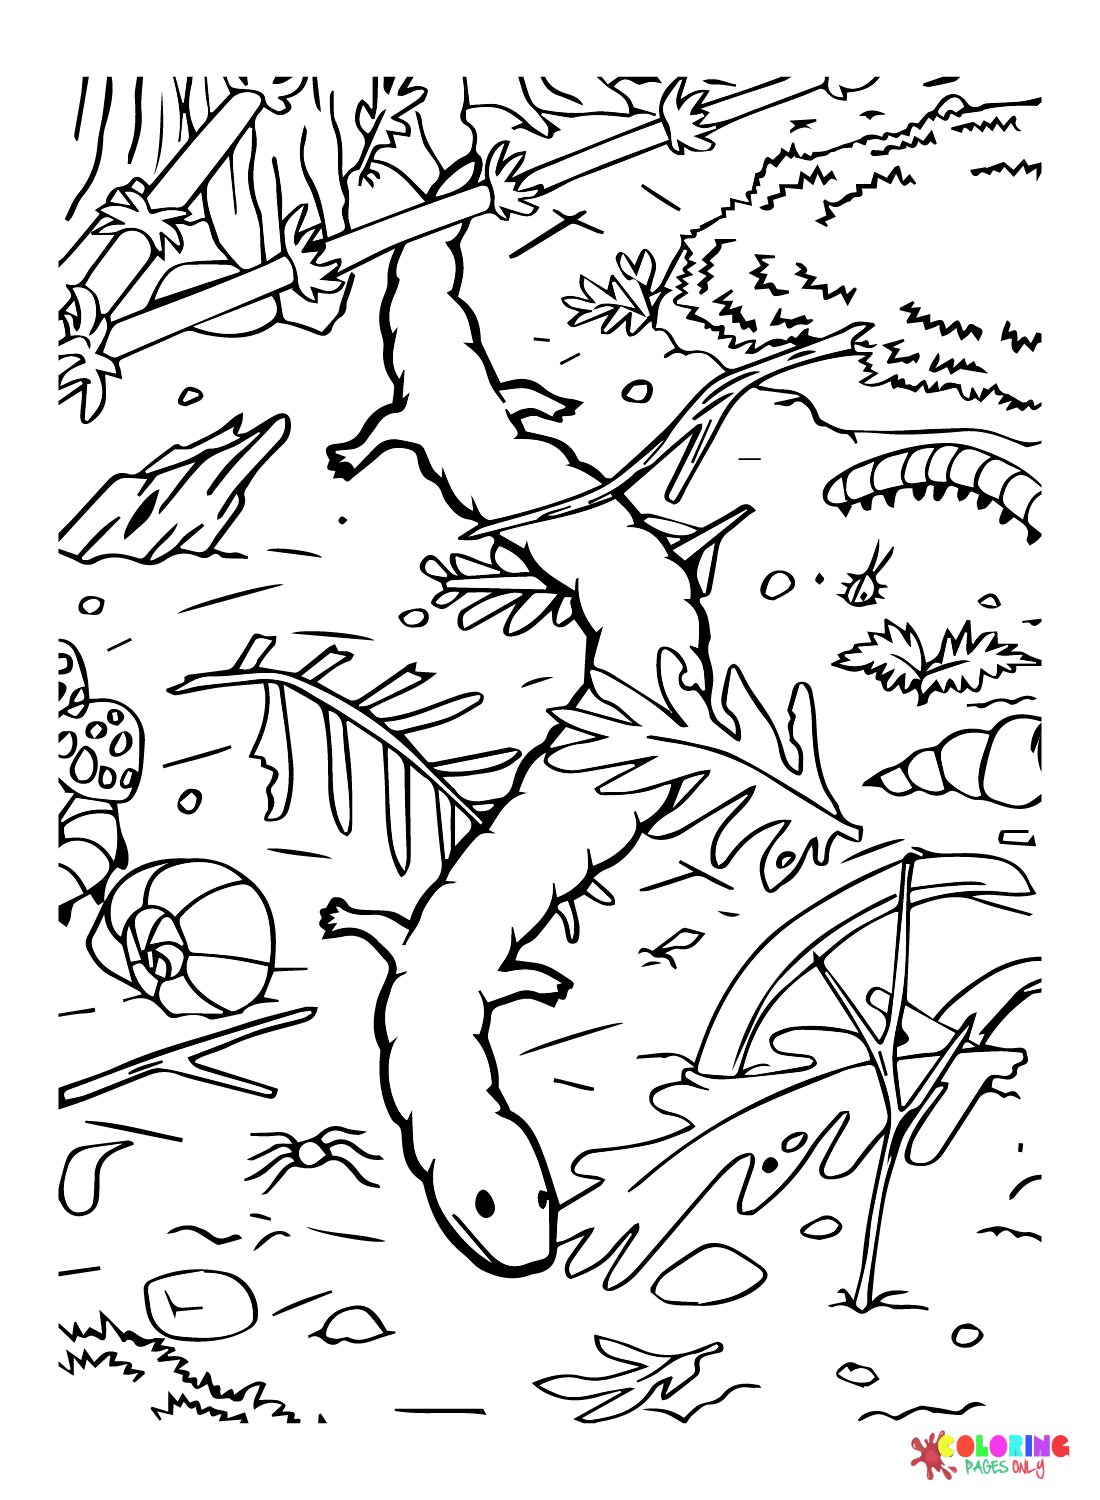 Prehistoric Creatures Coloring Page